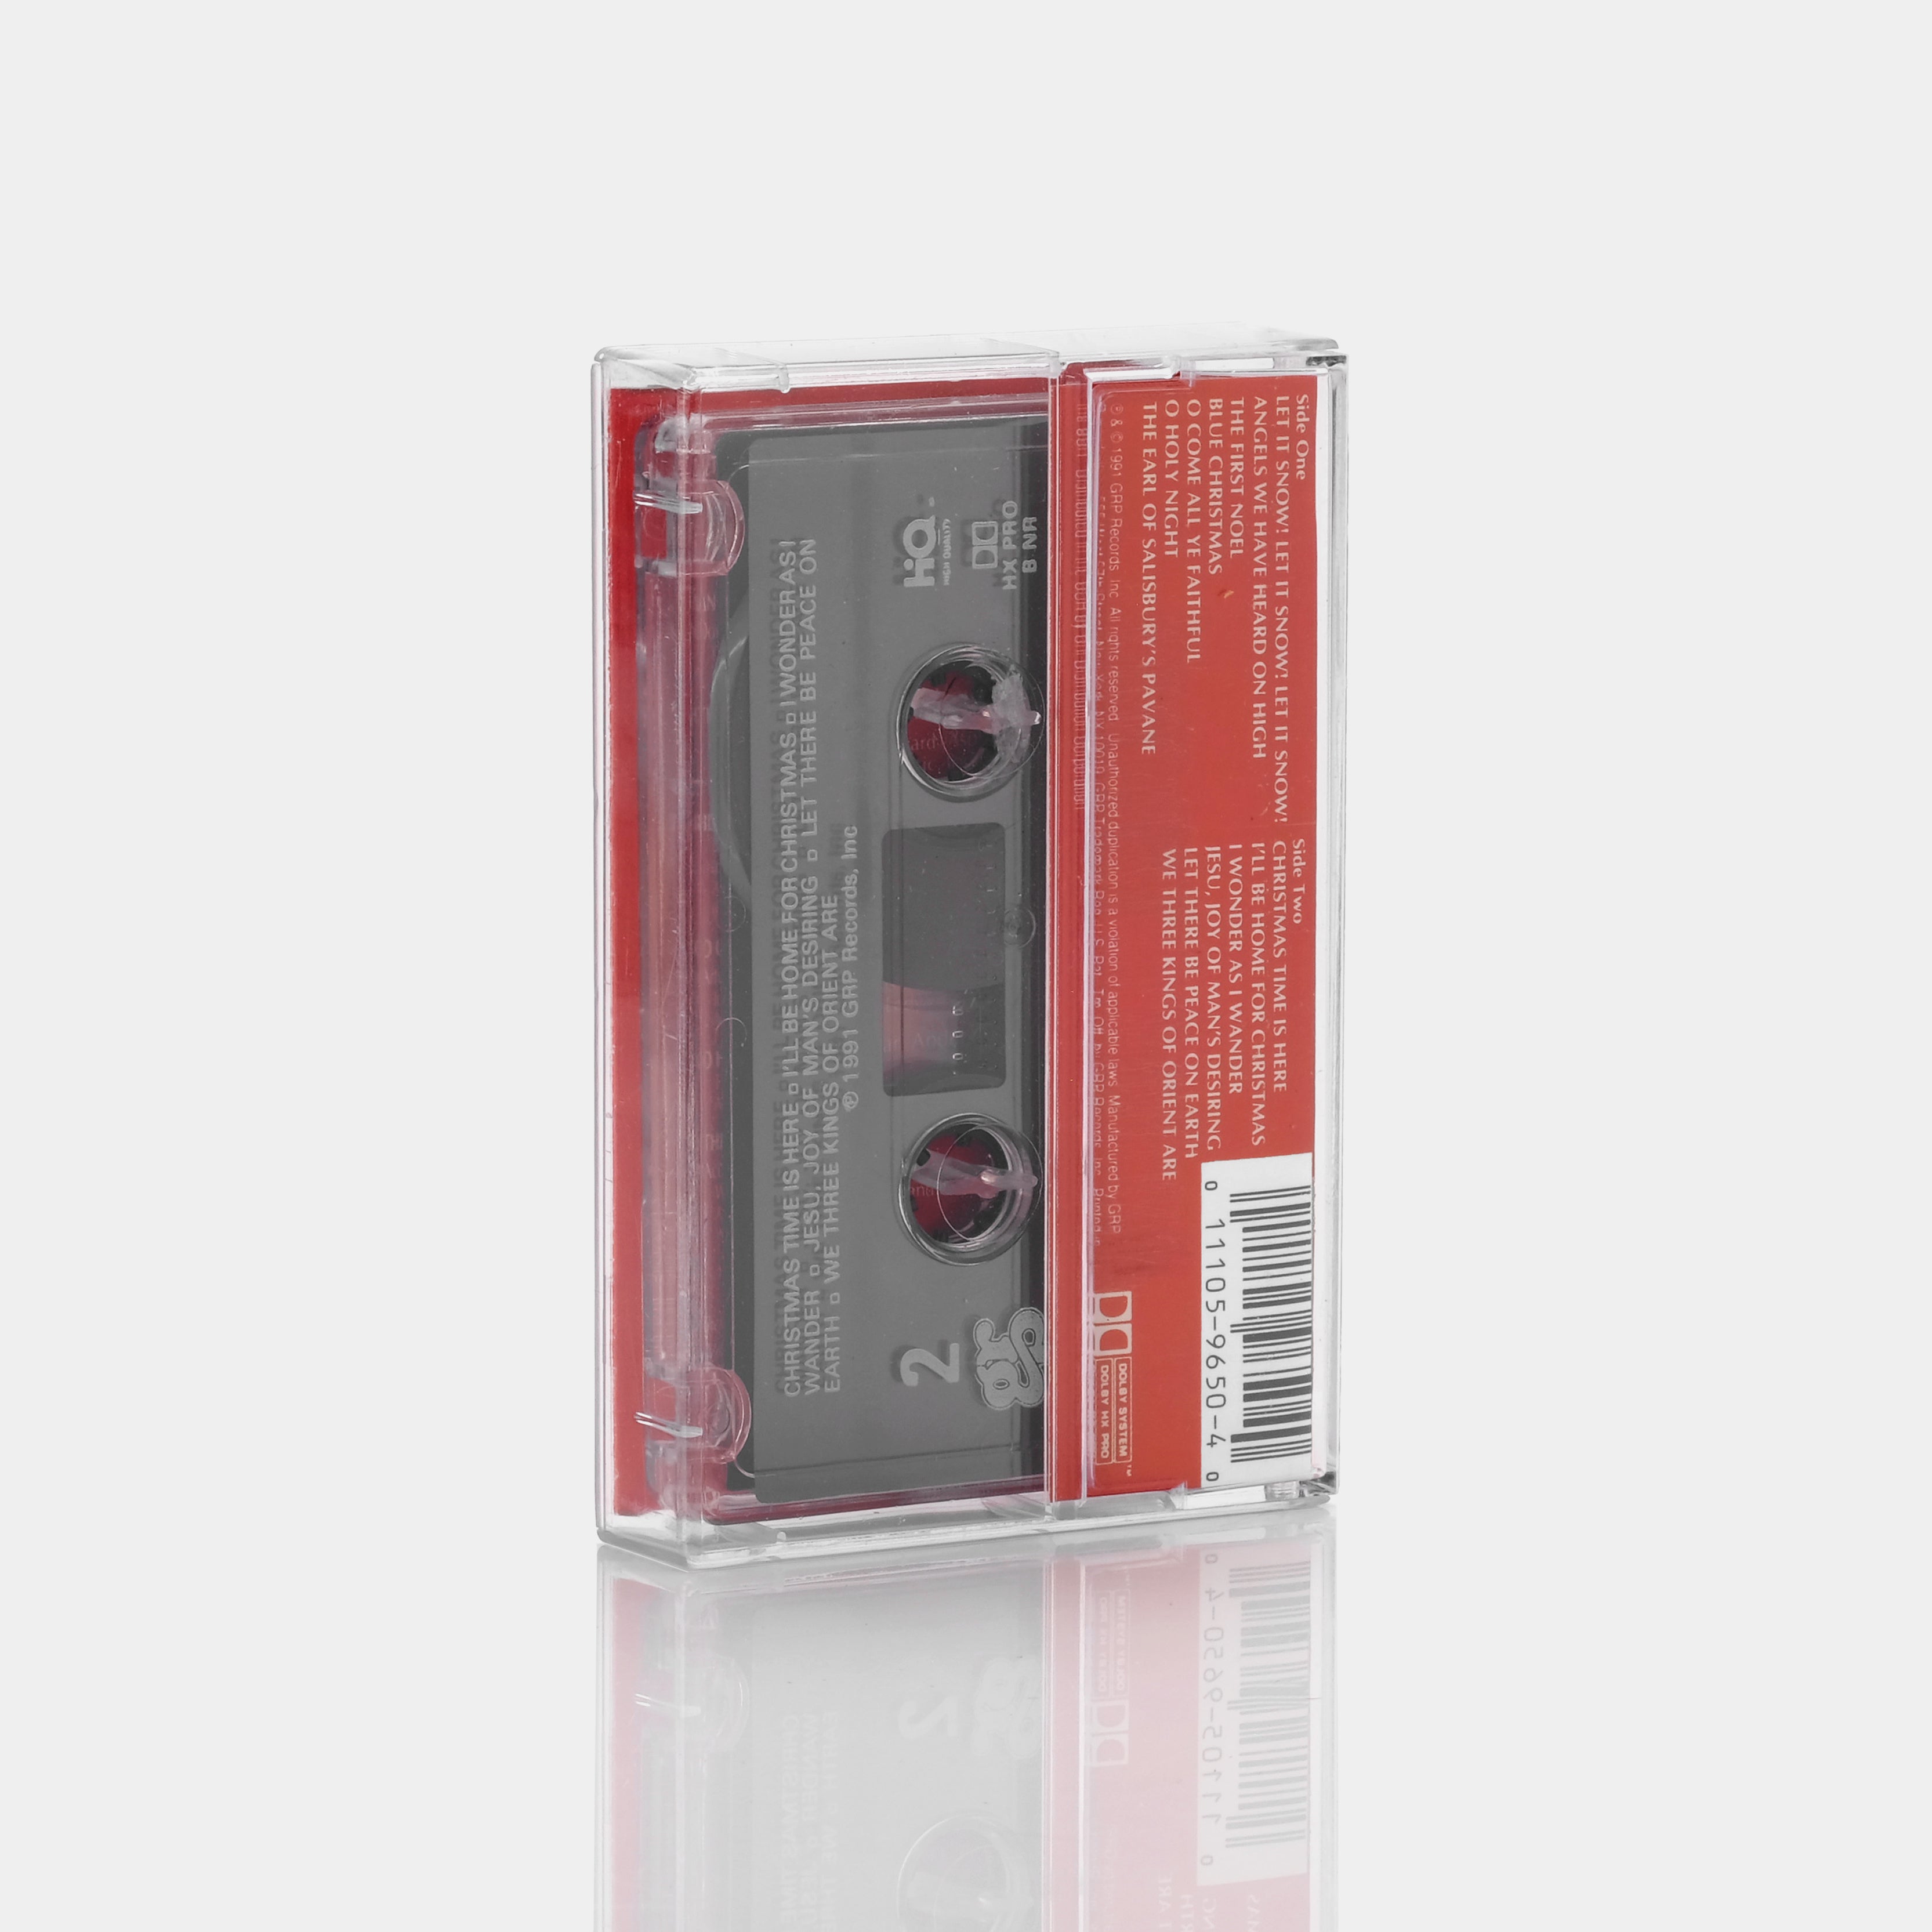 A GRP Christmas Collection Vol. II Cassette Tape